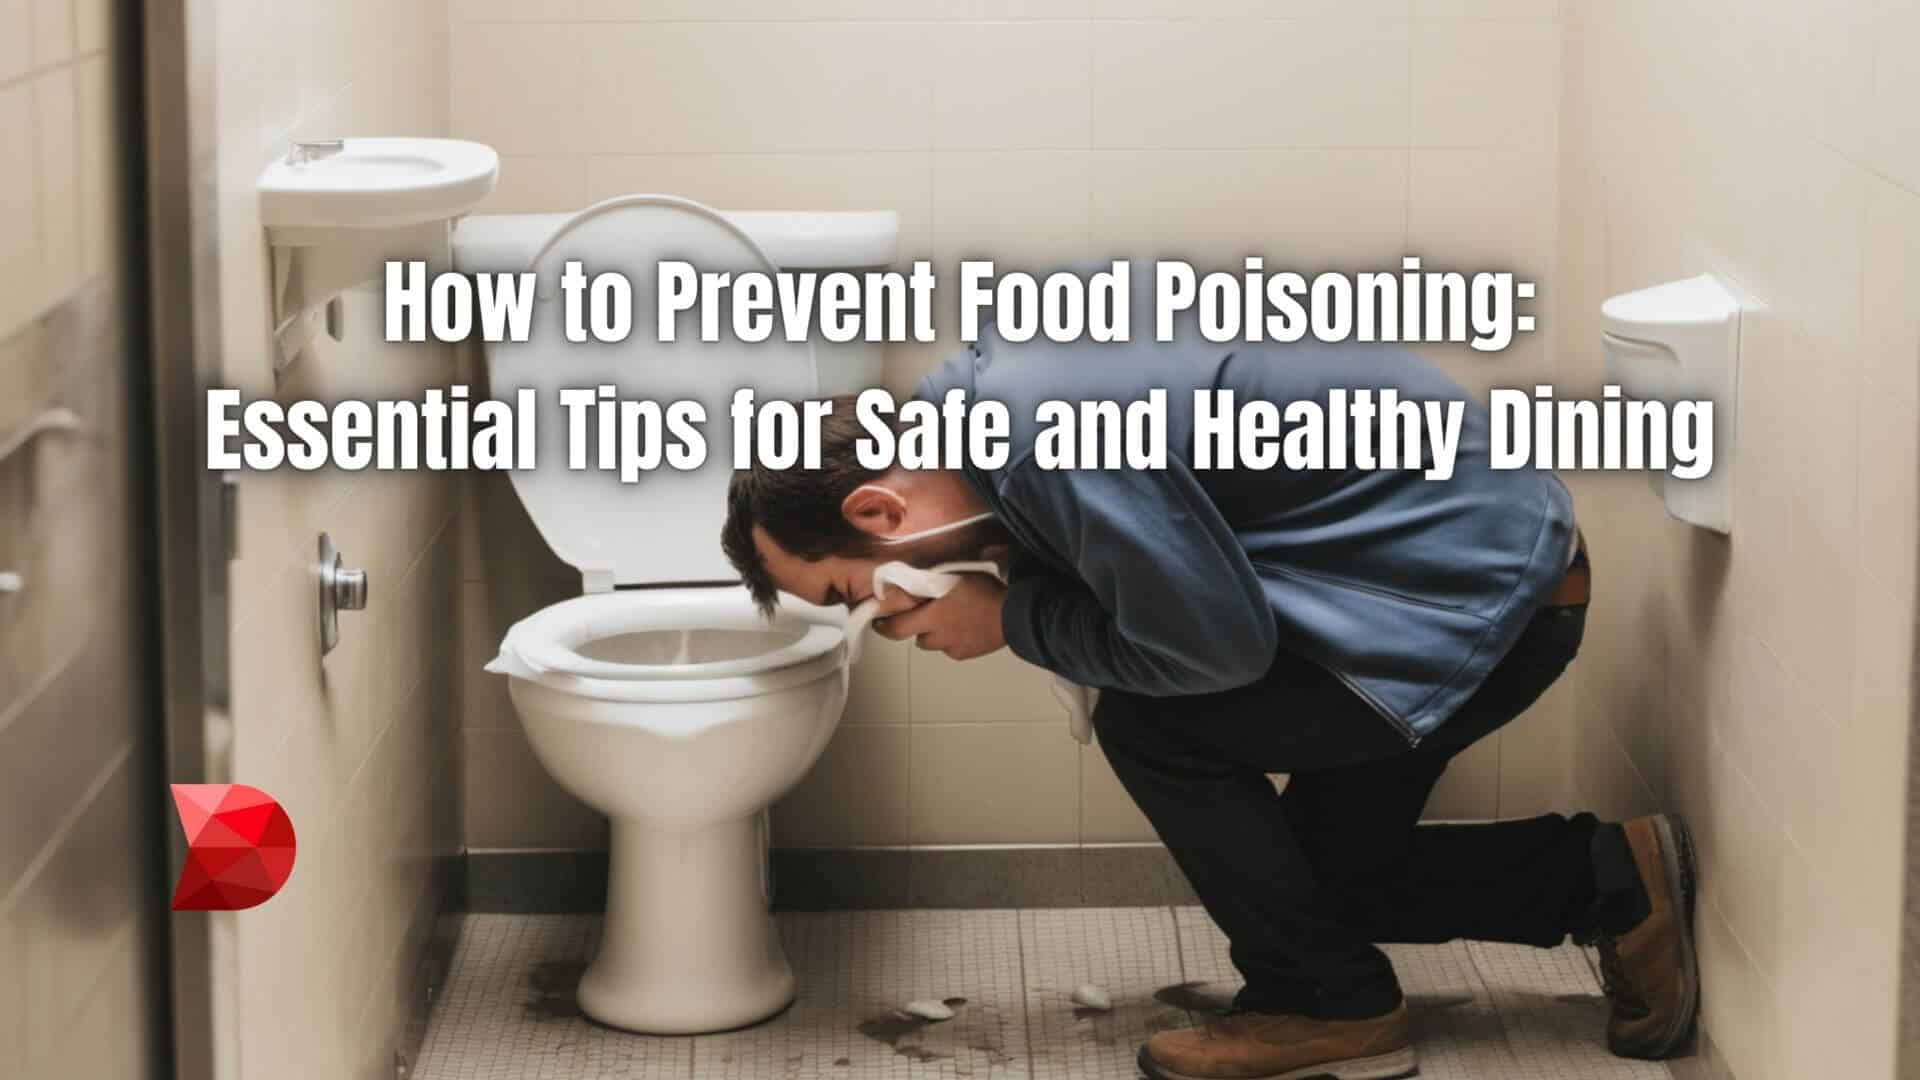 Safeguard your health with this comprehensive guide on preventing food poisoning. Click here to learn essential tips for safe eating!